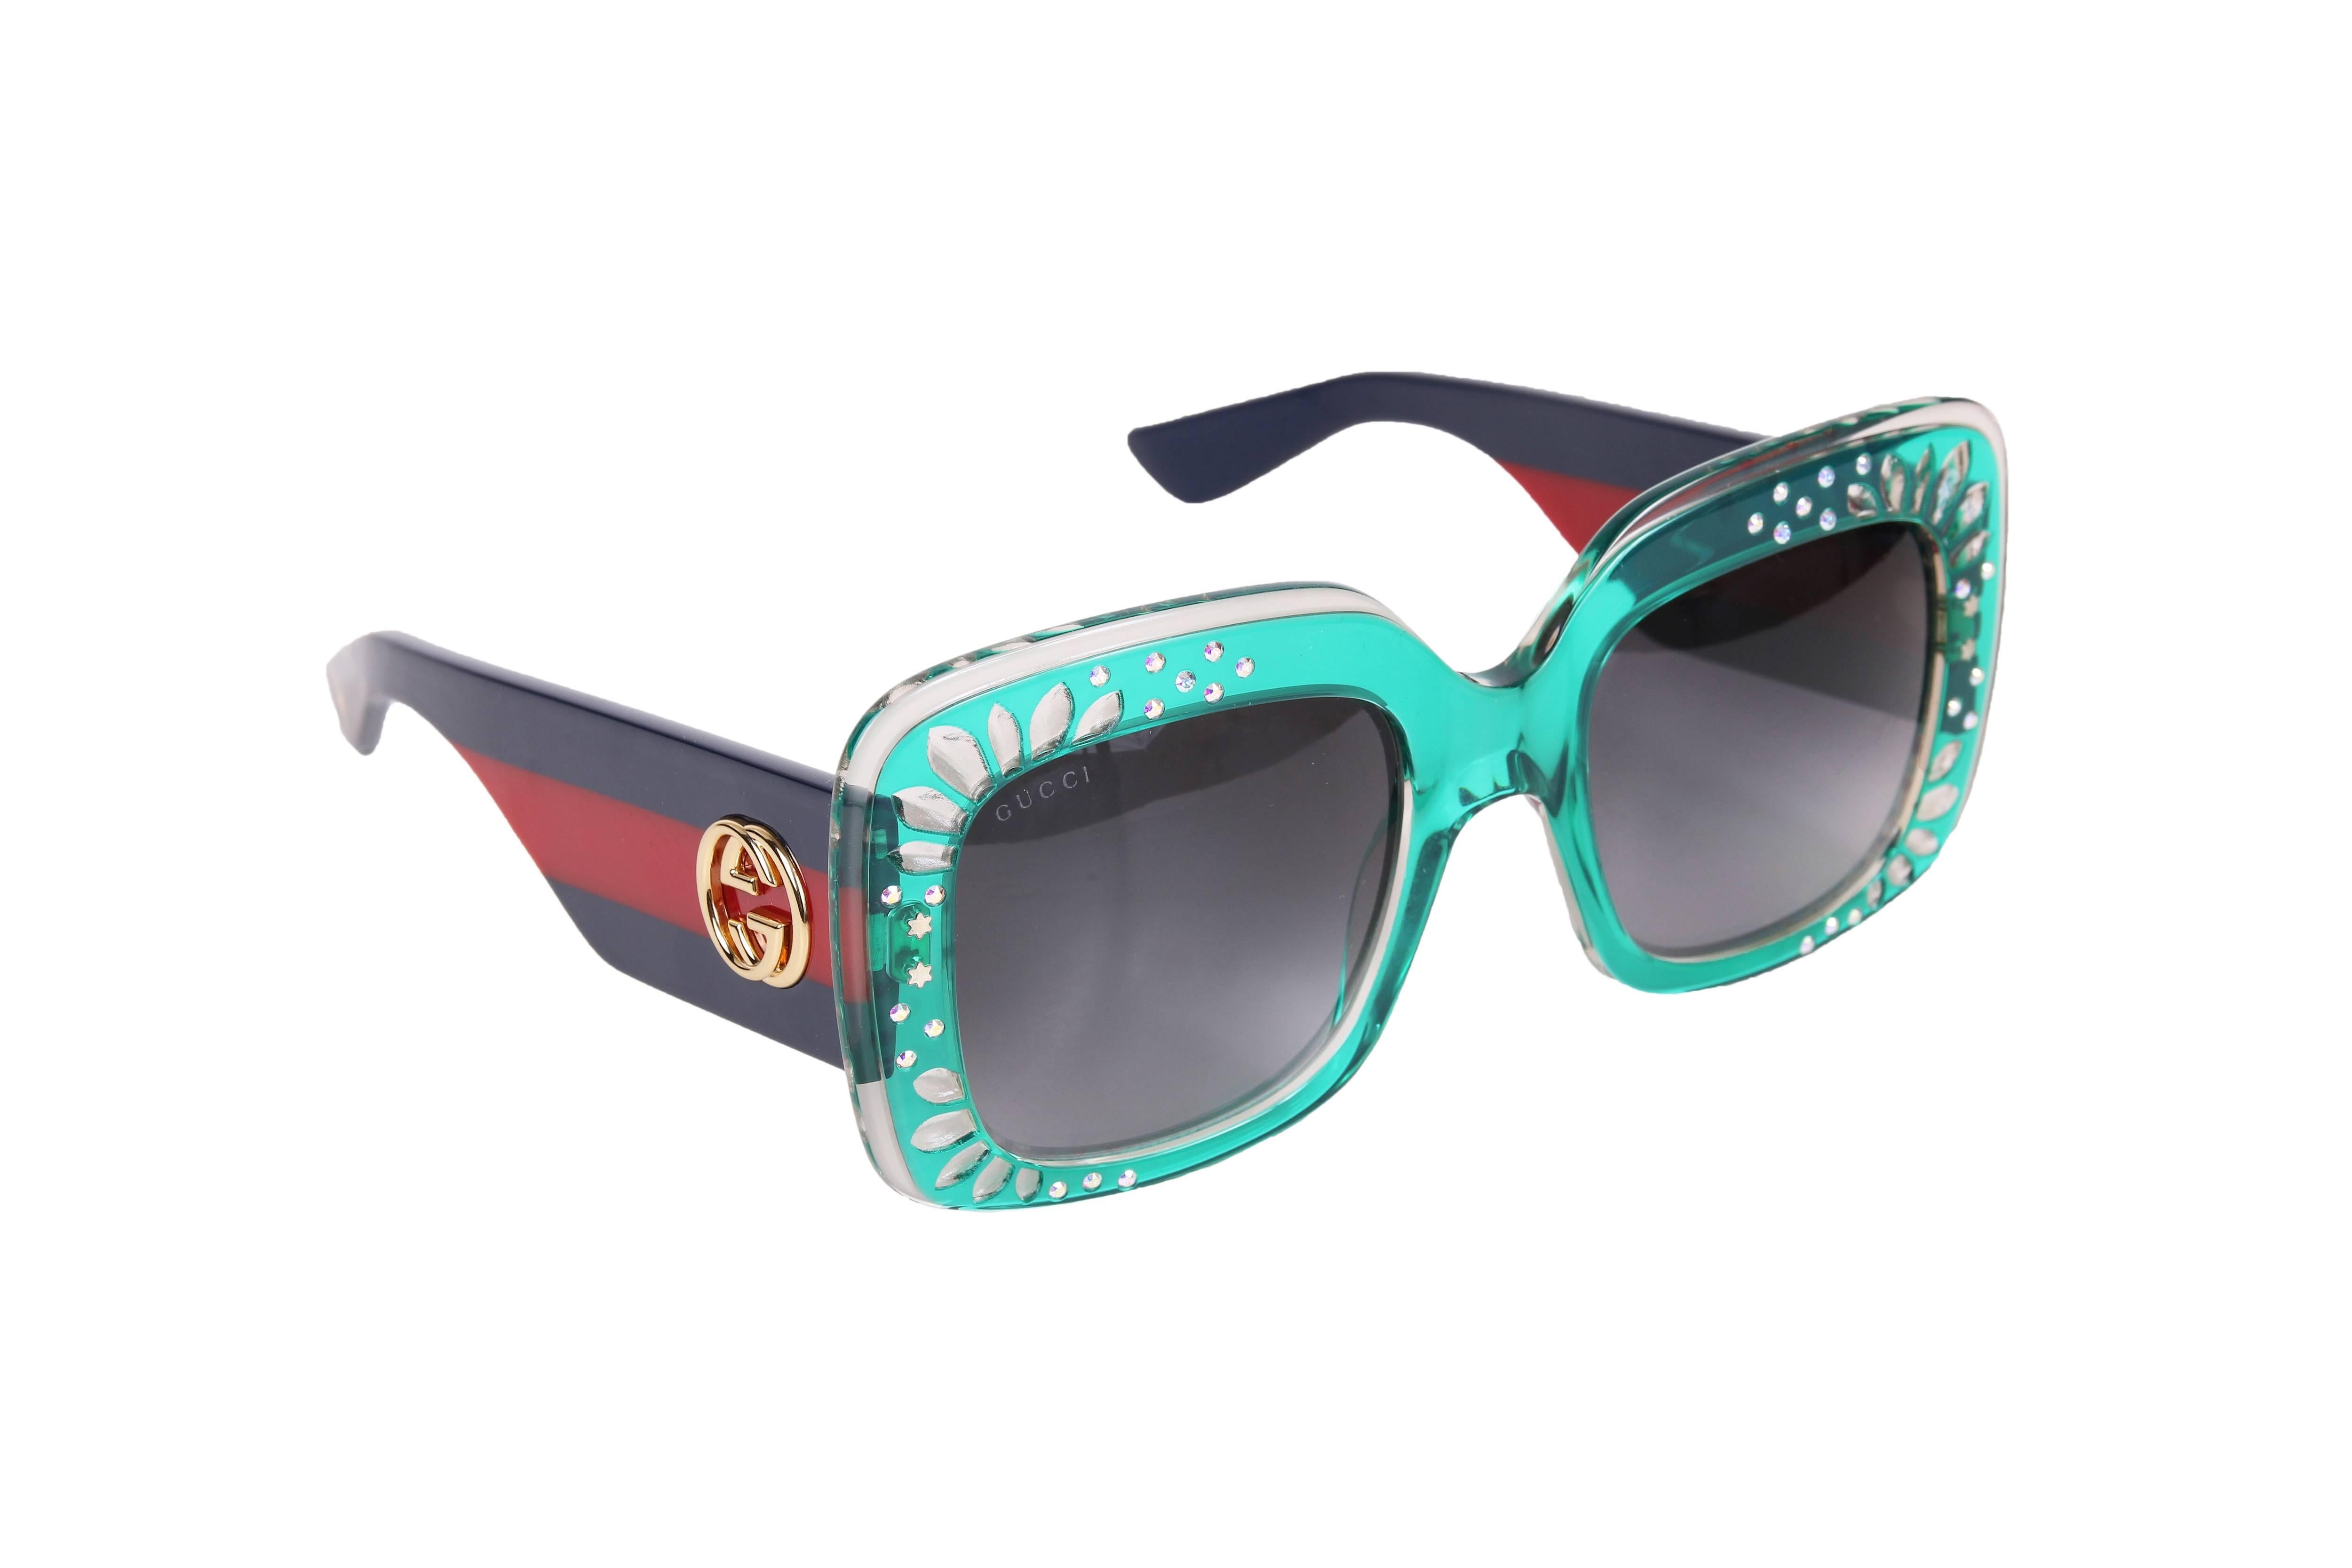 Gucci oversized square frame sunglasses in green acetate with etching detail at the frame as well as some rhinestones and stars. The sunglass arms are made of acetate and feature the iconic Gucci racer stripe in blue and red - punctuated with the